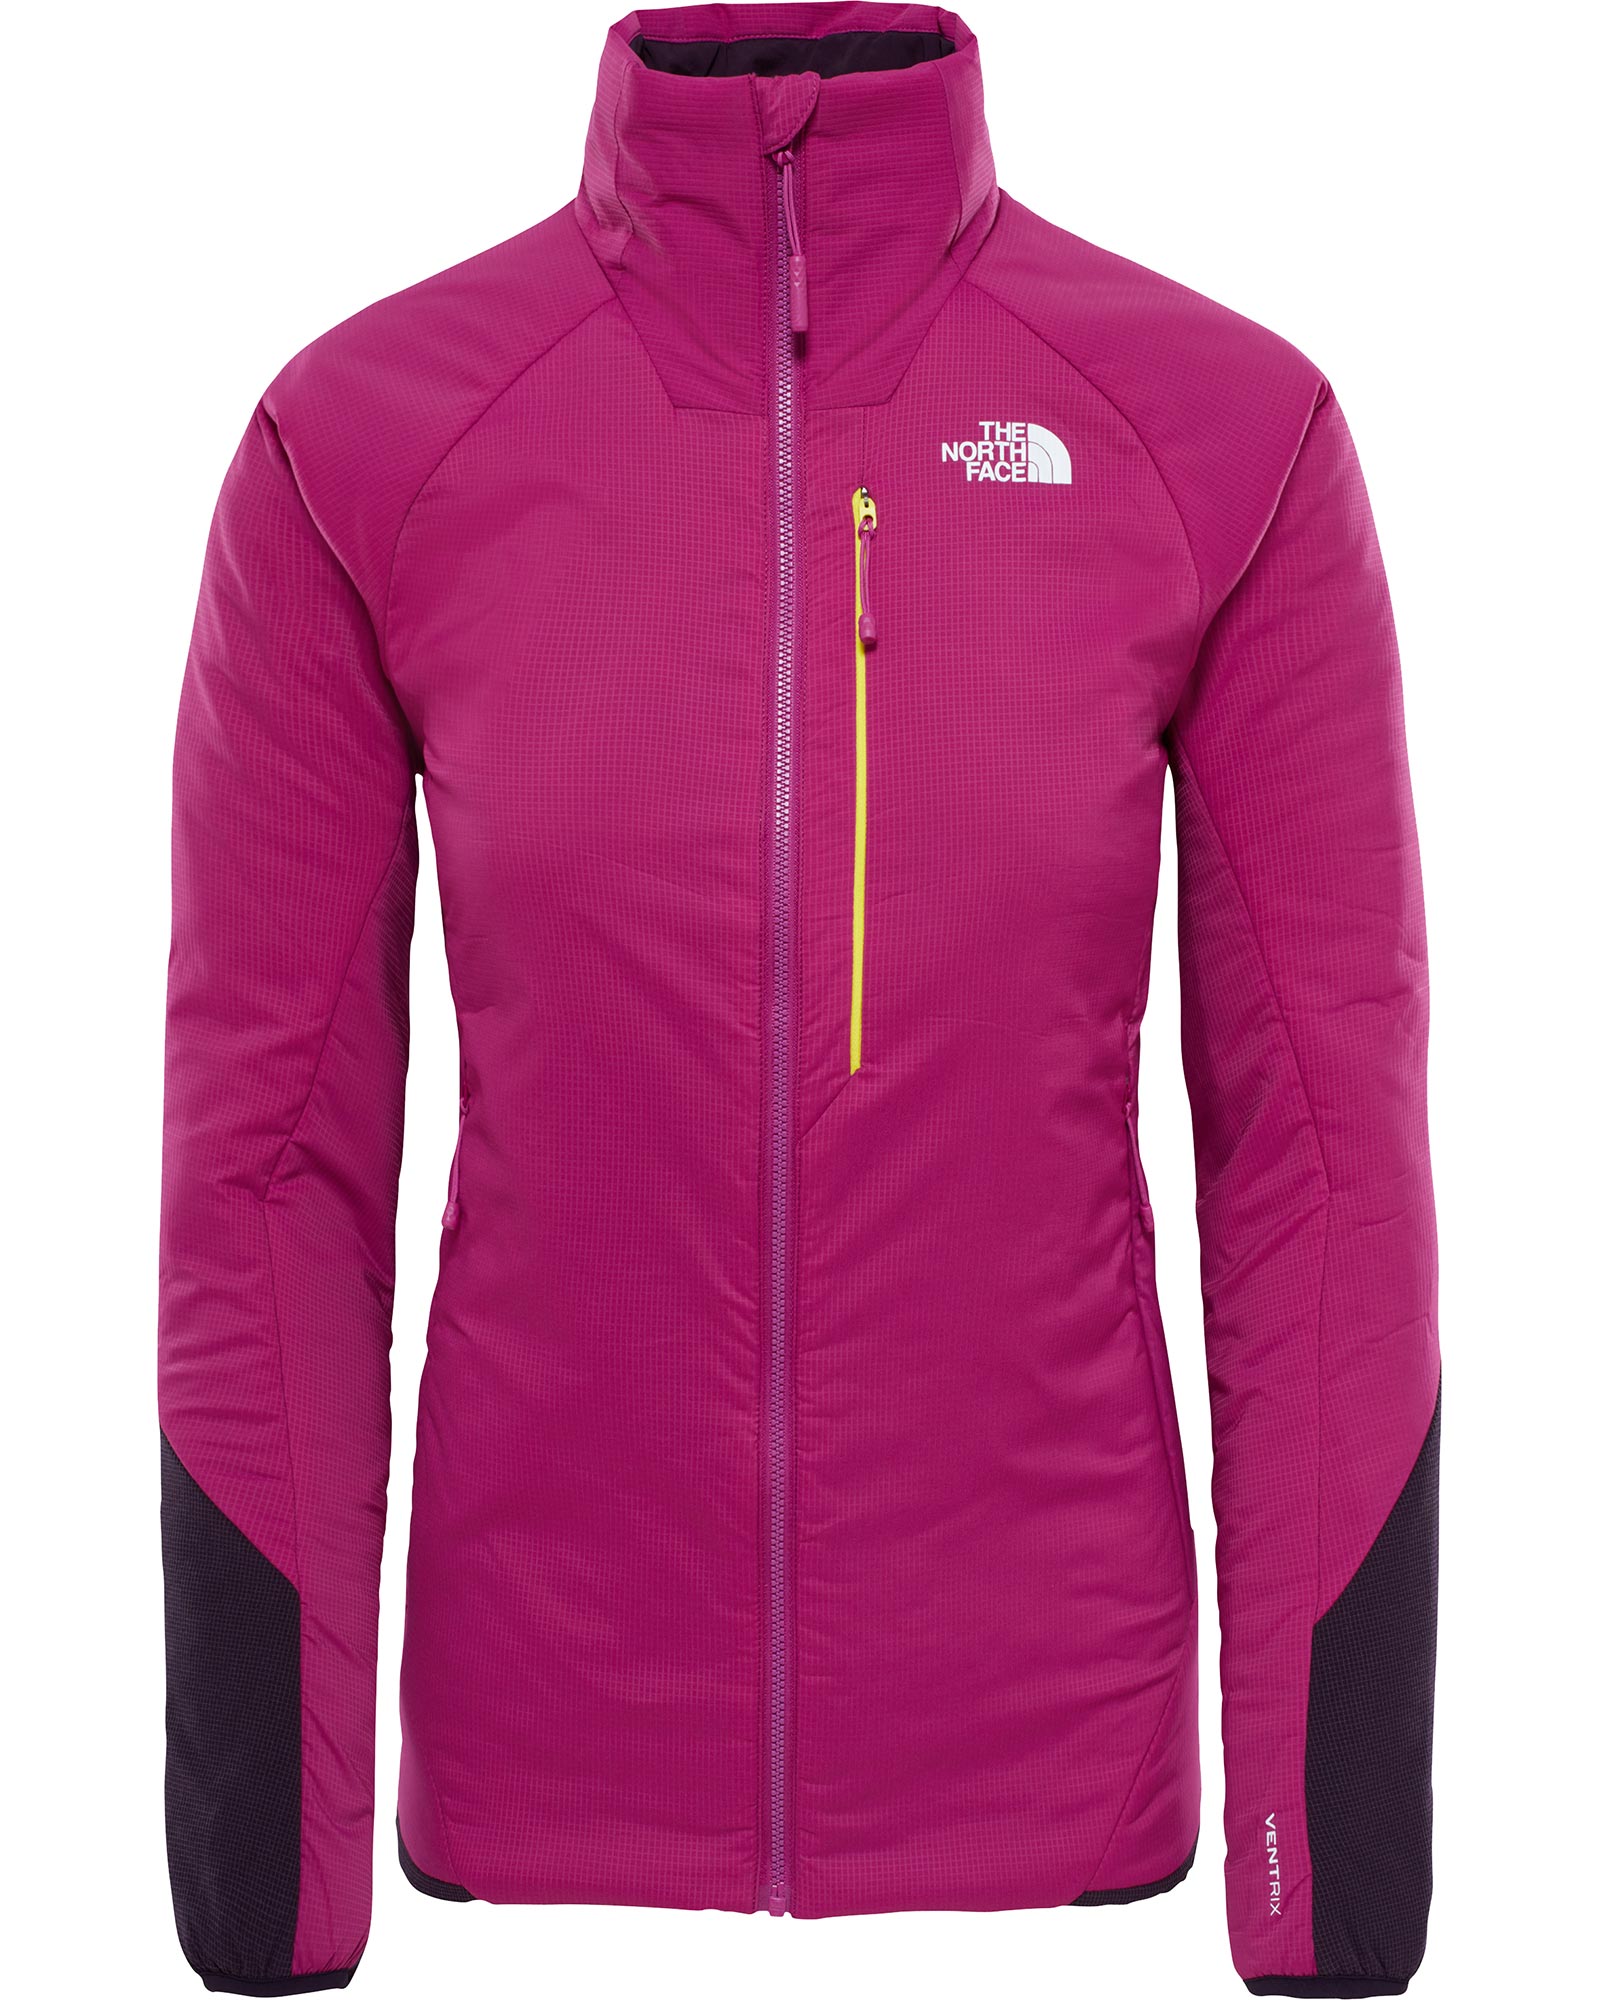 The North Face Ventrix Womens Jacket